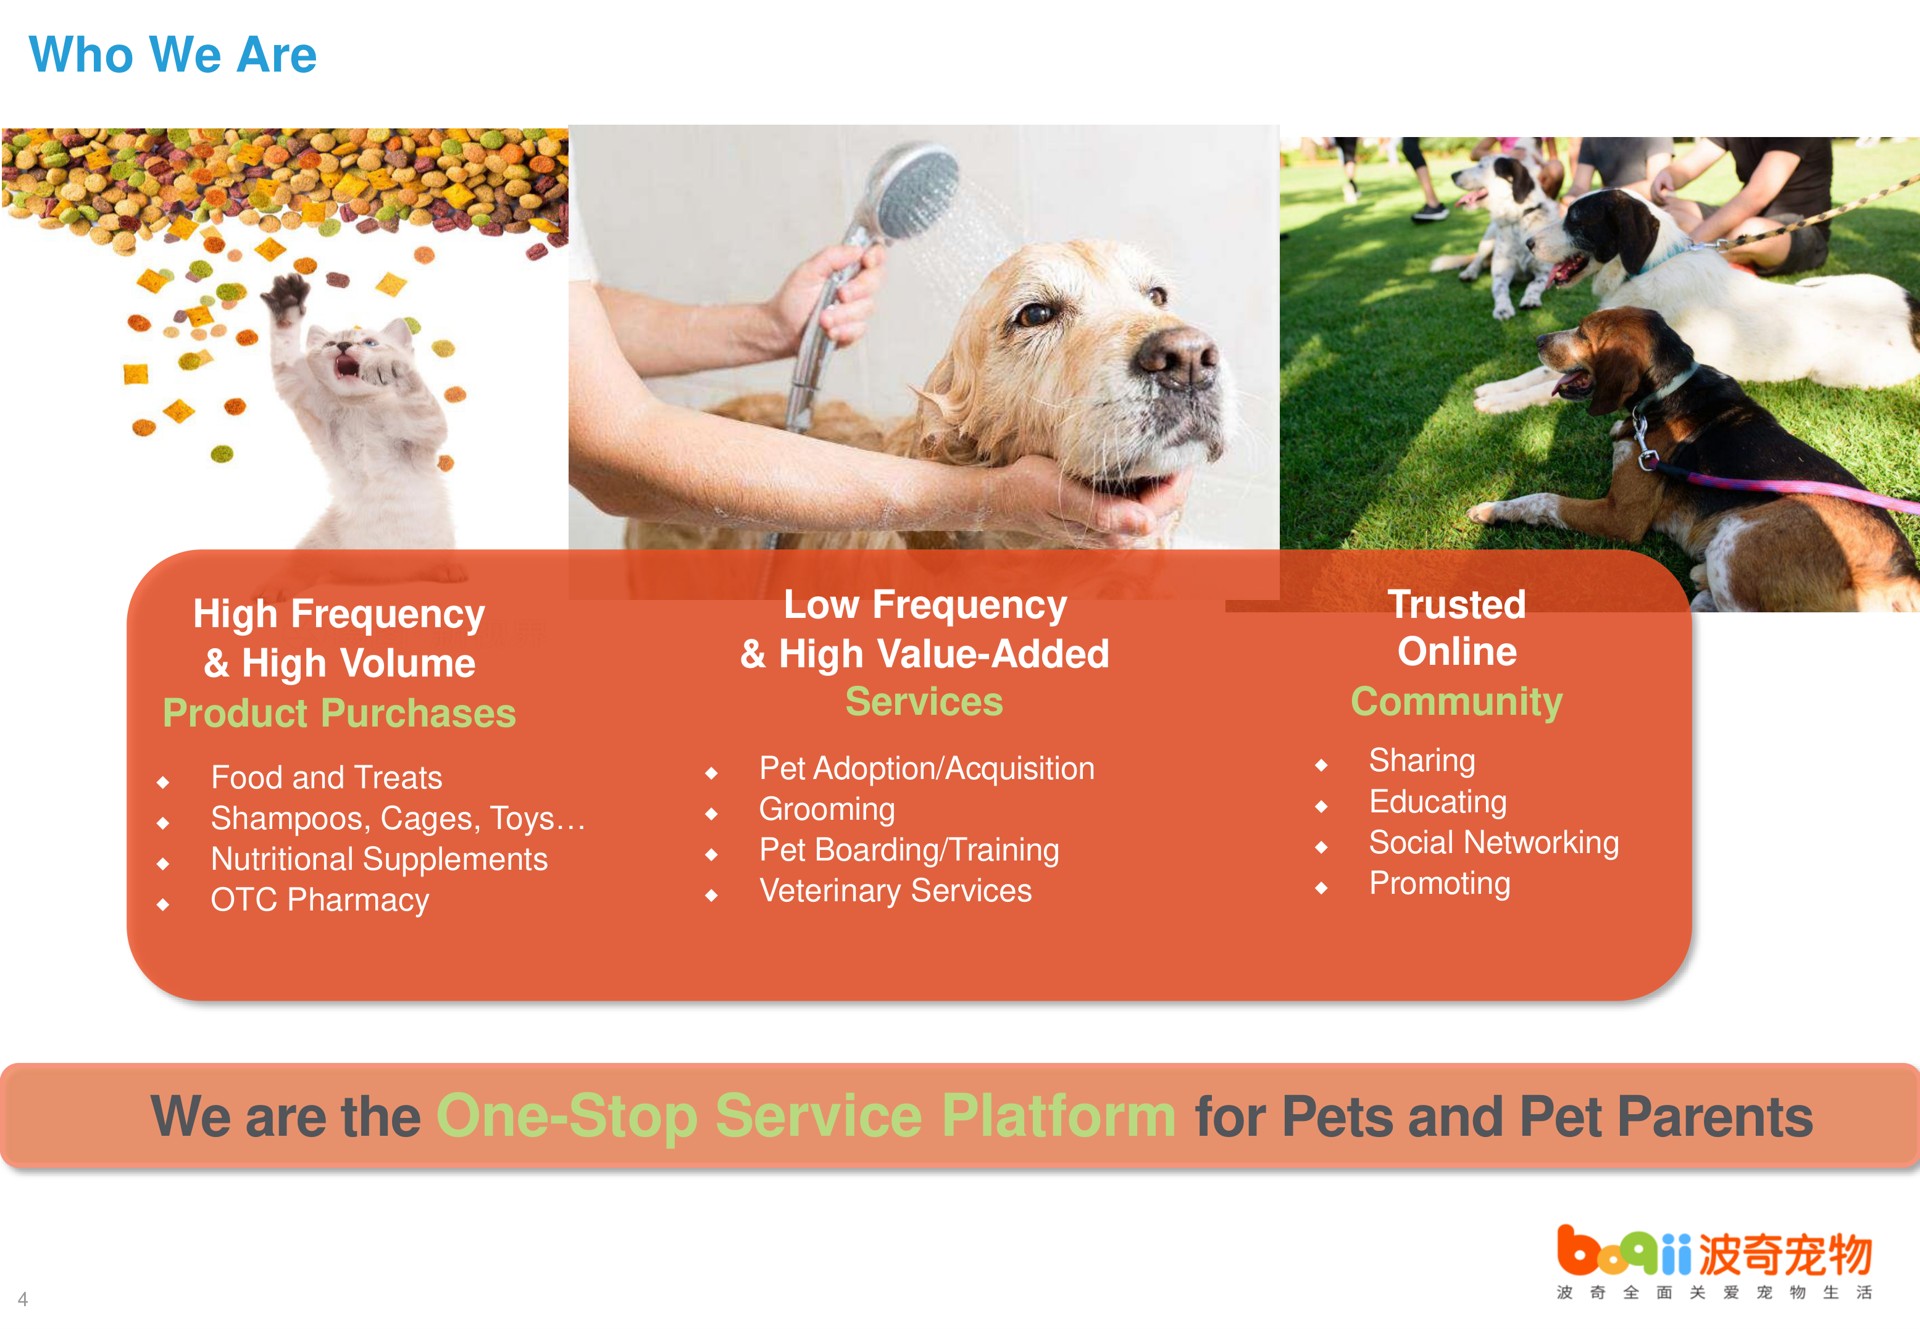 who we are we are the one stop service platform for pets and pet parents high frequency high volume product purchases low frequency high value added trusted | Boqii Holding